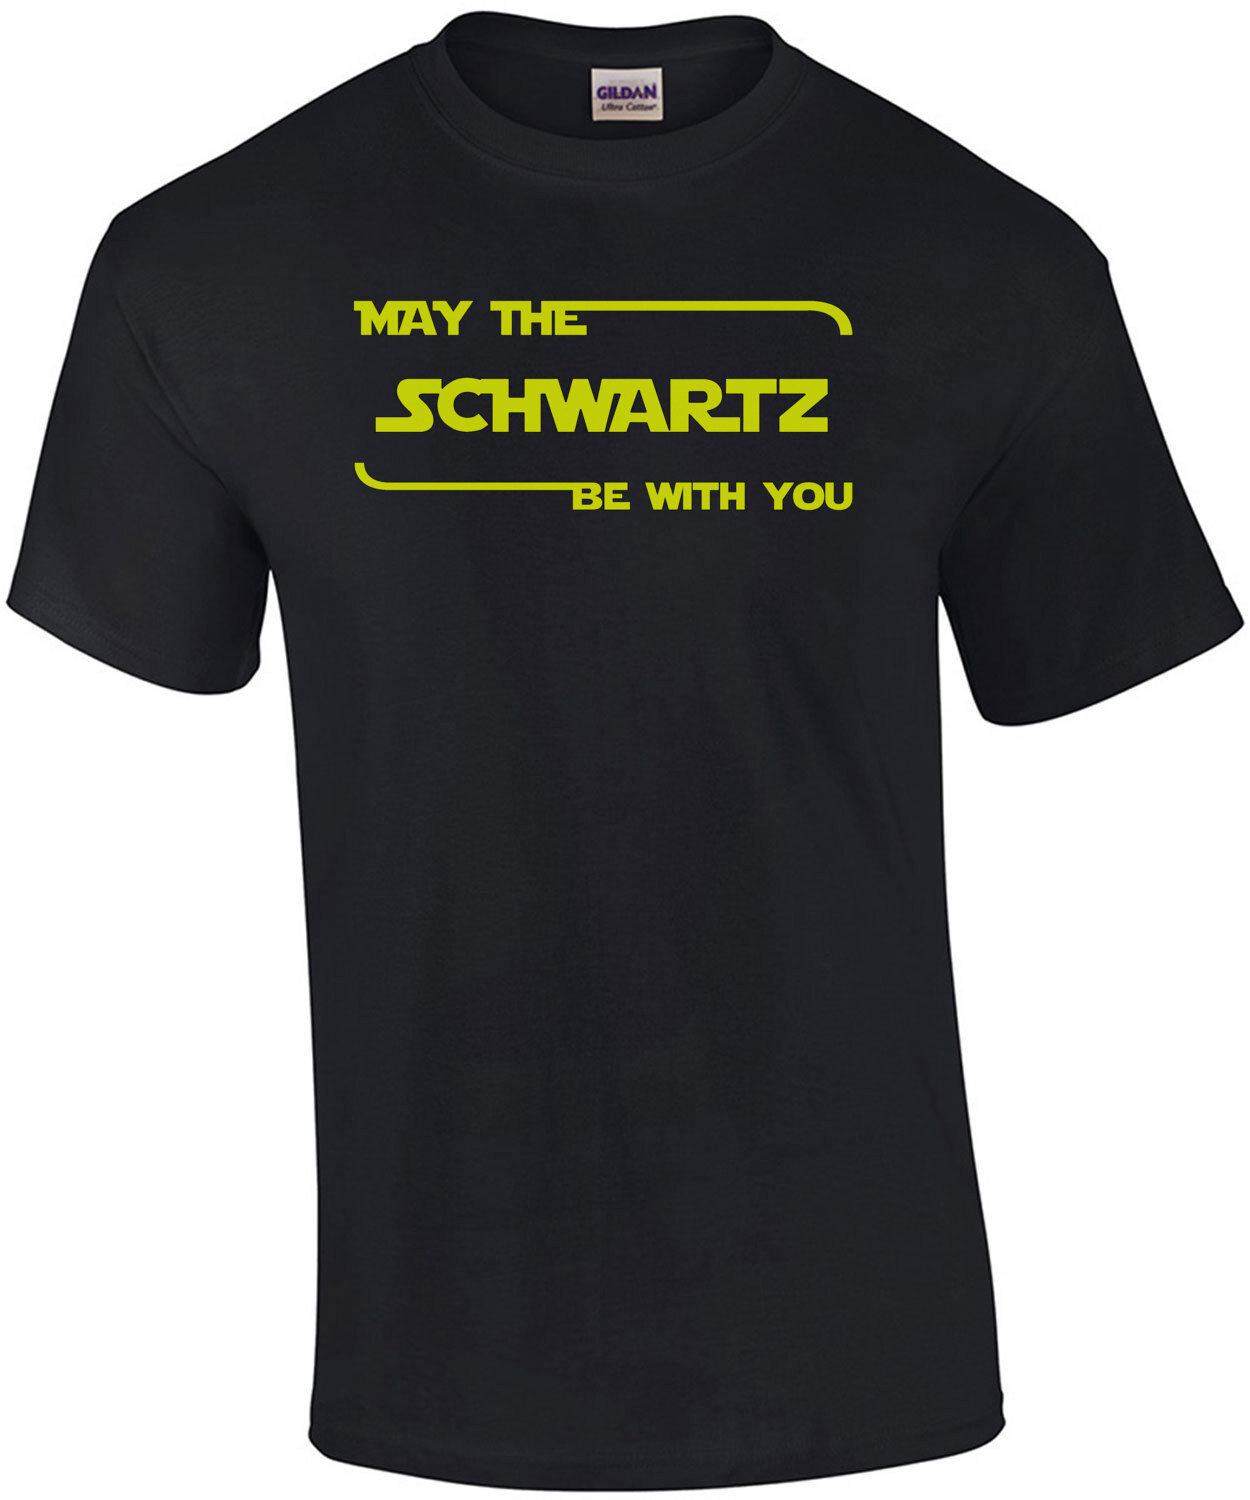 May the Schwartz be with you - funny spaceballs 90's t-shirt